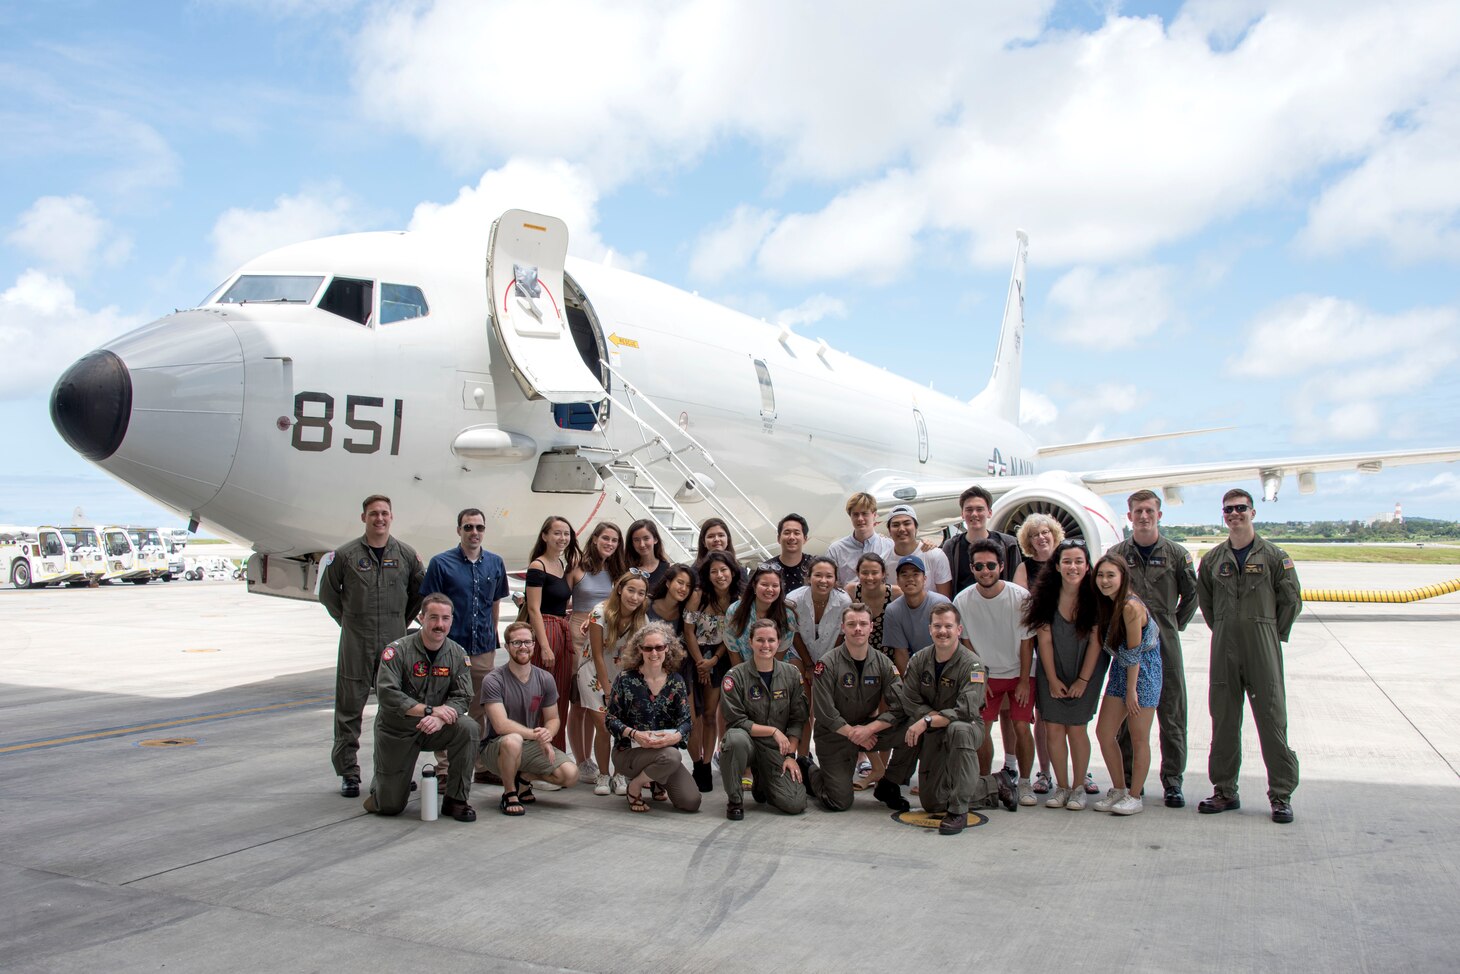 Sailors assigned to the "Skinny Dragons" of Patrol Squadron (VP) 4, pose for a photo with students and teachers from the American School in Japan. The students were in Okinawa to learn about the U.S. Navy’s and the Japan Maritime Self-Defense Force’s (JMSDF) roles, capabilities and missions.